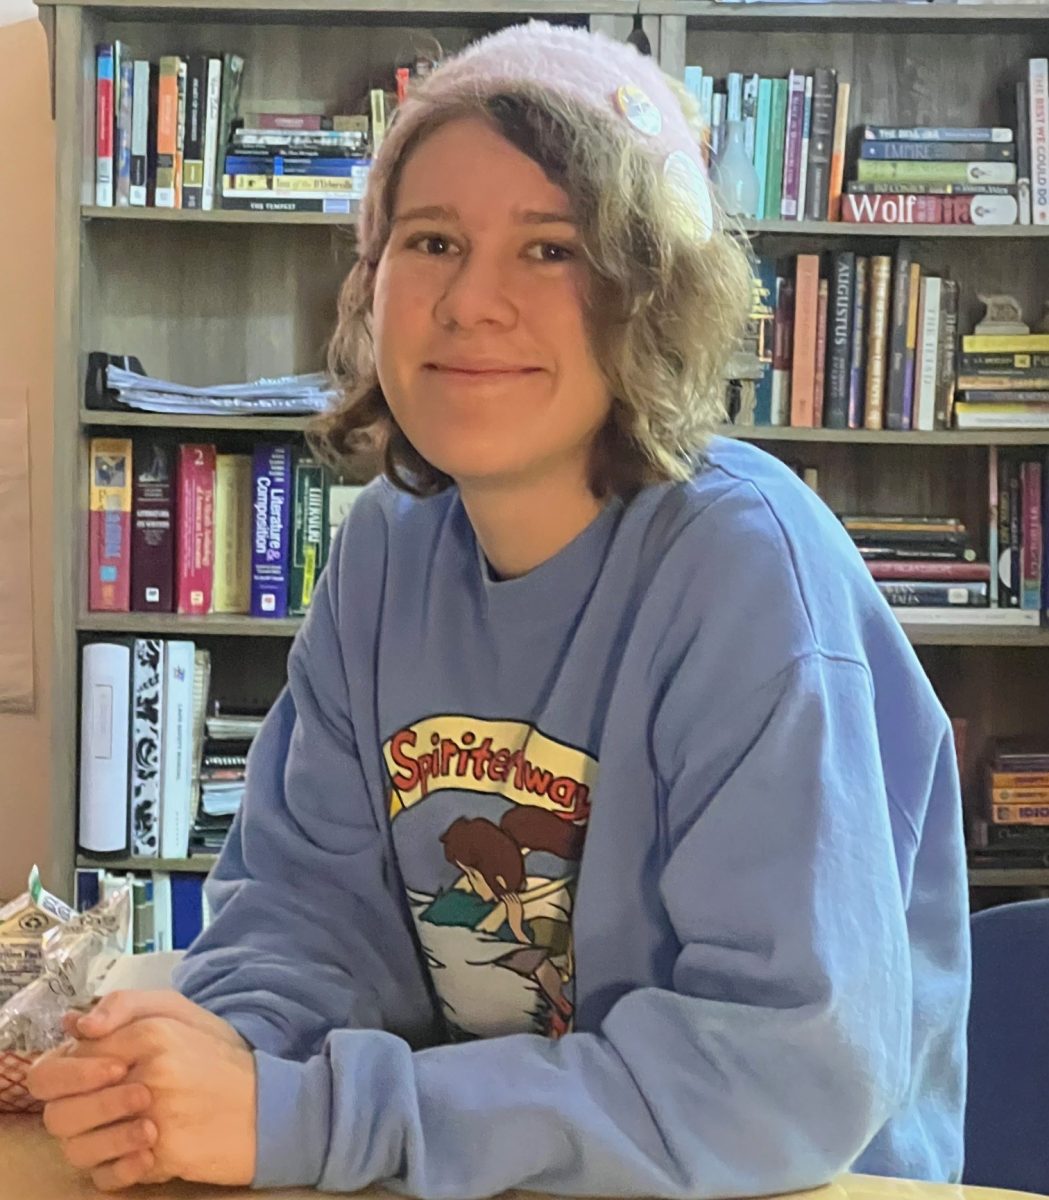 Senior Caroline Legere described the end of fall semester as the biggest hill to climb before graduation. After spring semester starts, it’s downhill from there, she said.